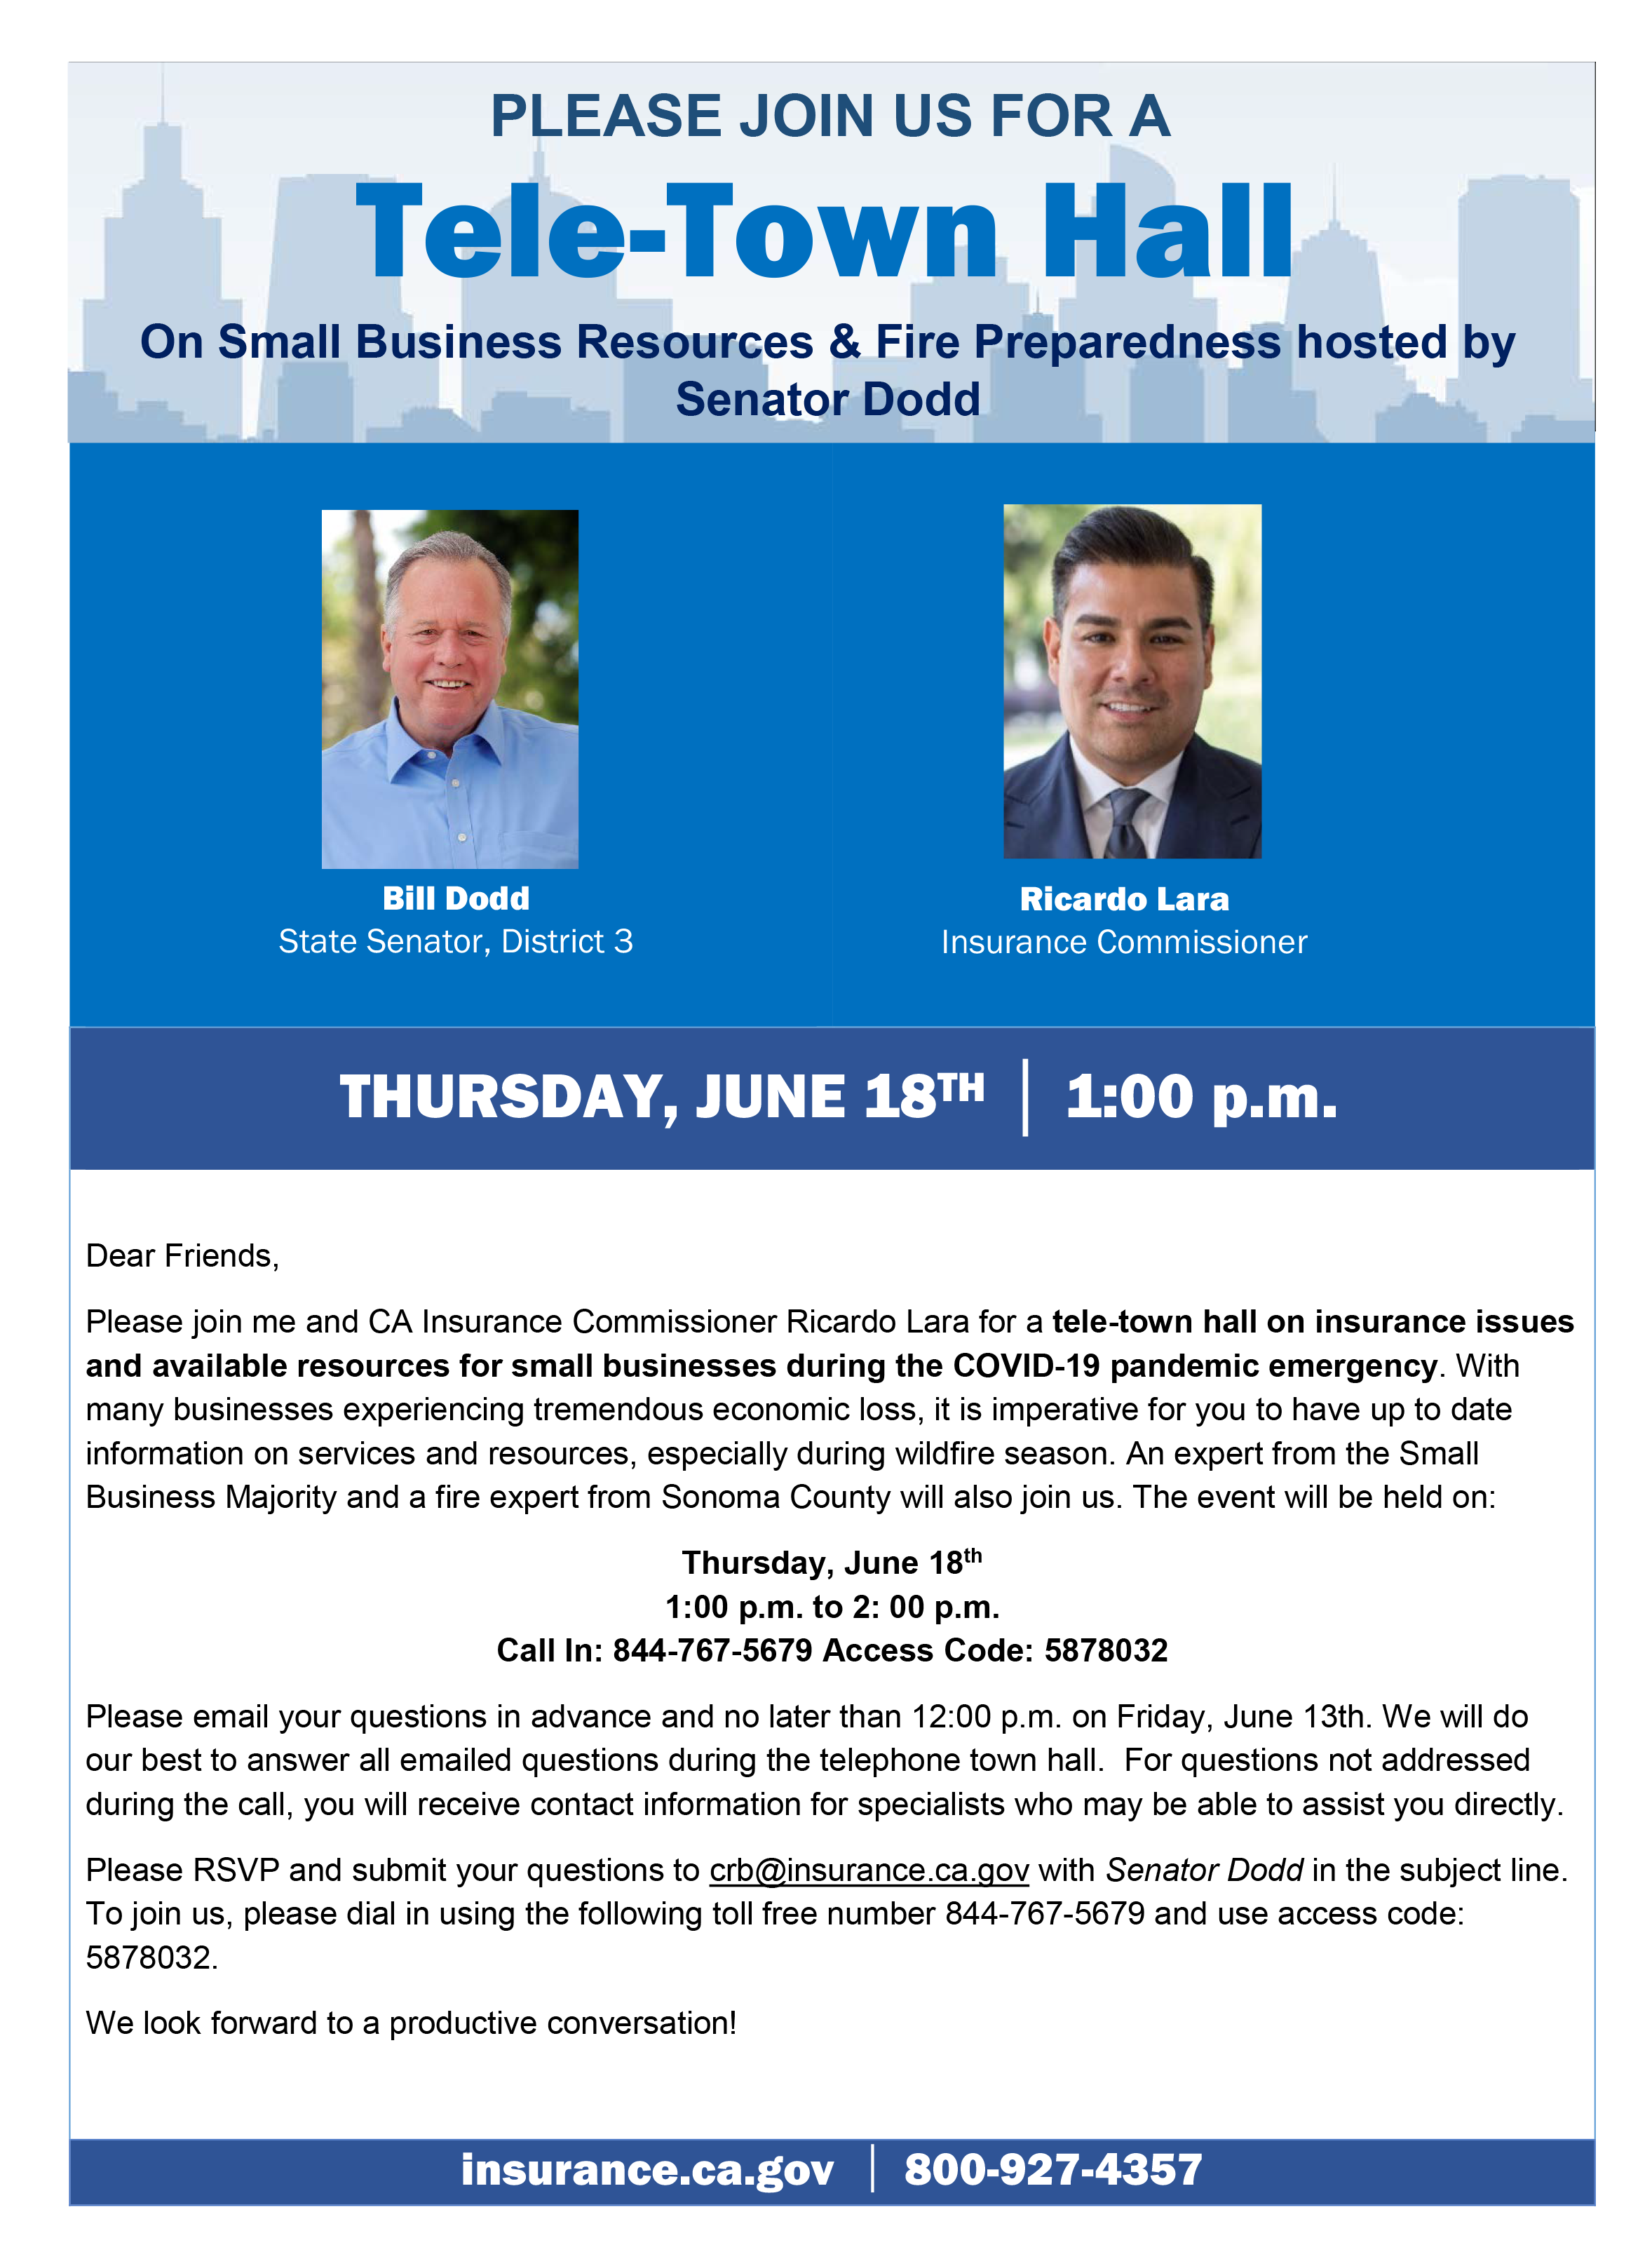 Please join us for a tele townhall on insurance and small buinsess resources during the covid19 emergency. Thursday, June 18th at 1pm. Please email your questions by 10am June 16th to crb@insurance.ca.gov and you will recieve a telephone and access code. 